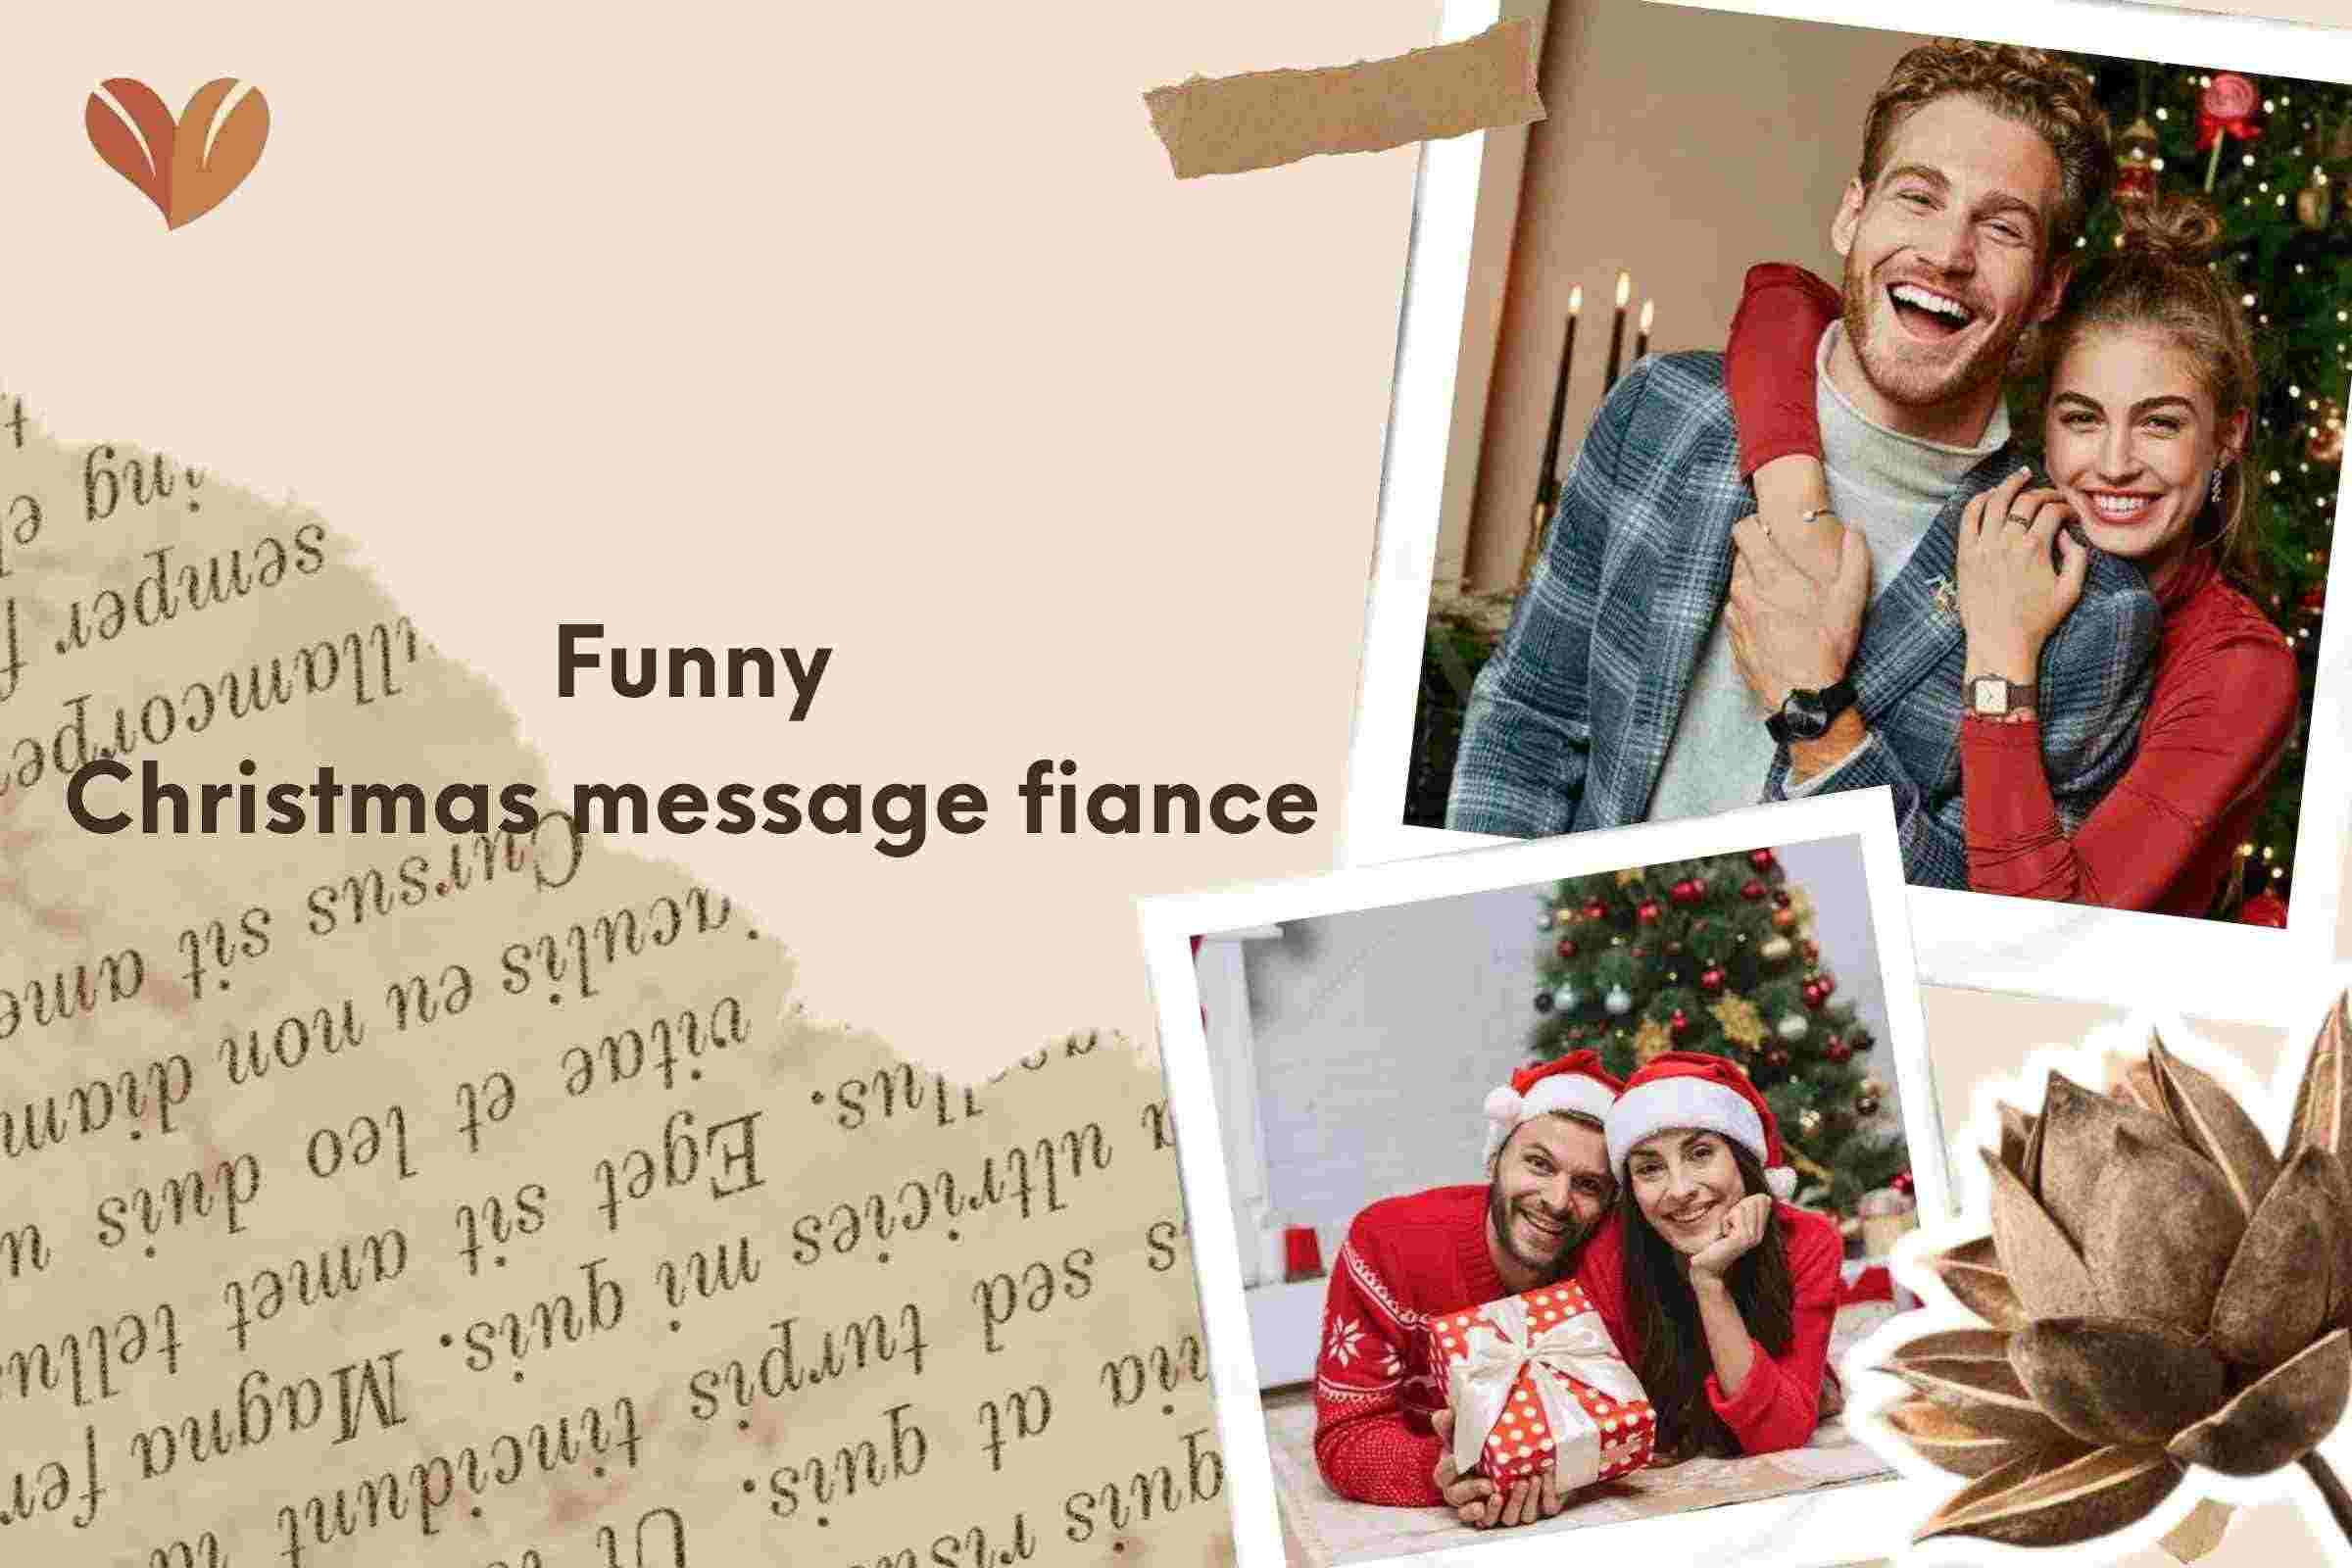 Top 30 Funny Christmas message fiance